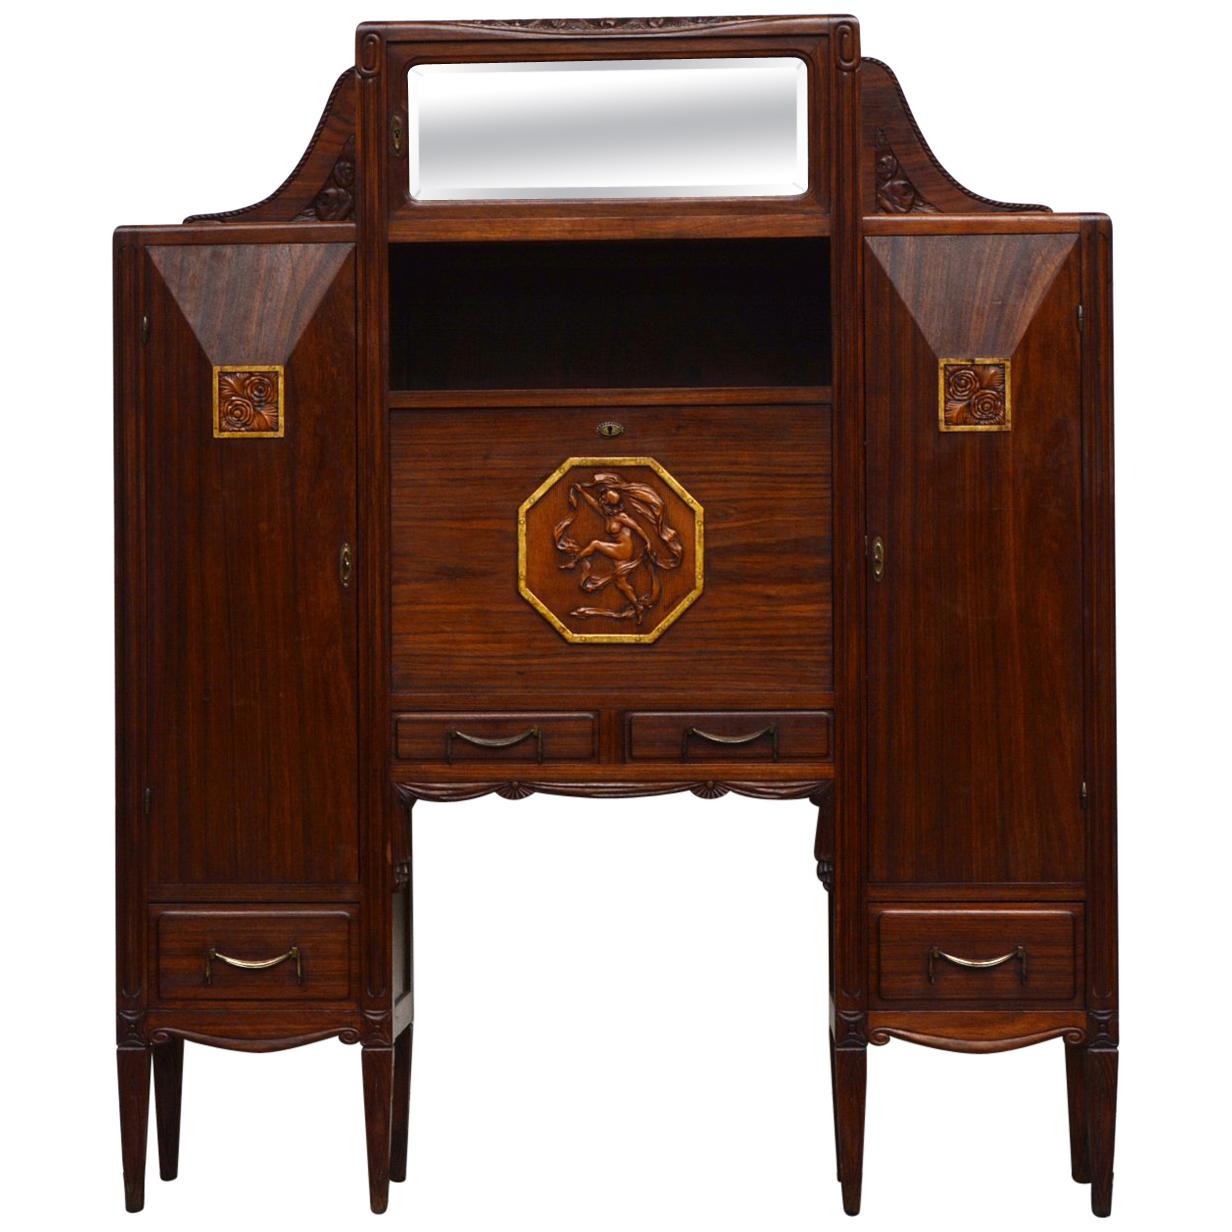 Art Deco Sideboard / Secretary, Paris, Signed "Therond", dated 1924